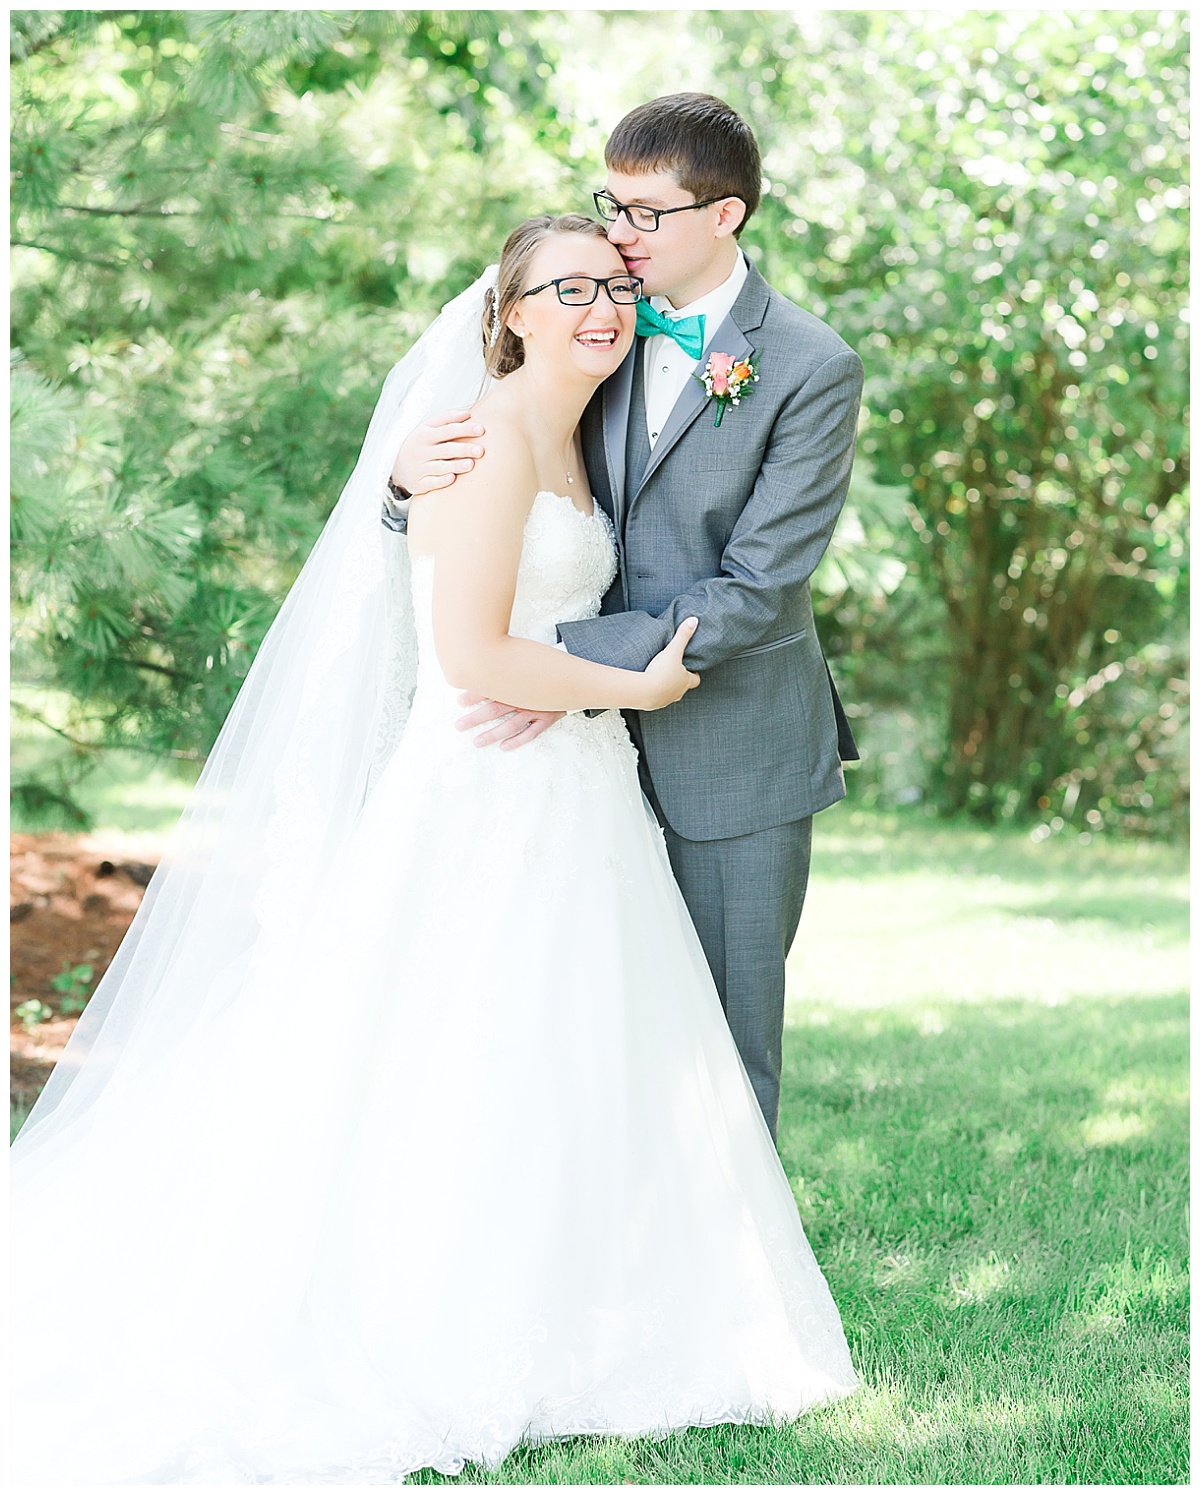  bride and groom| teal and coral wedding with gray tux